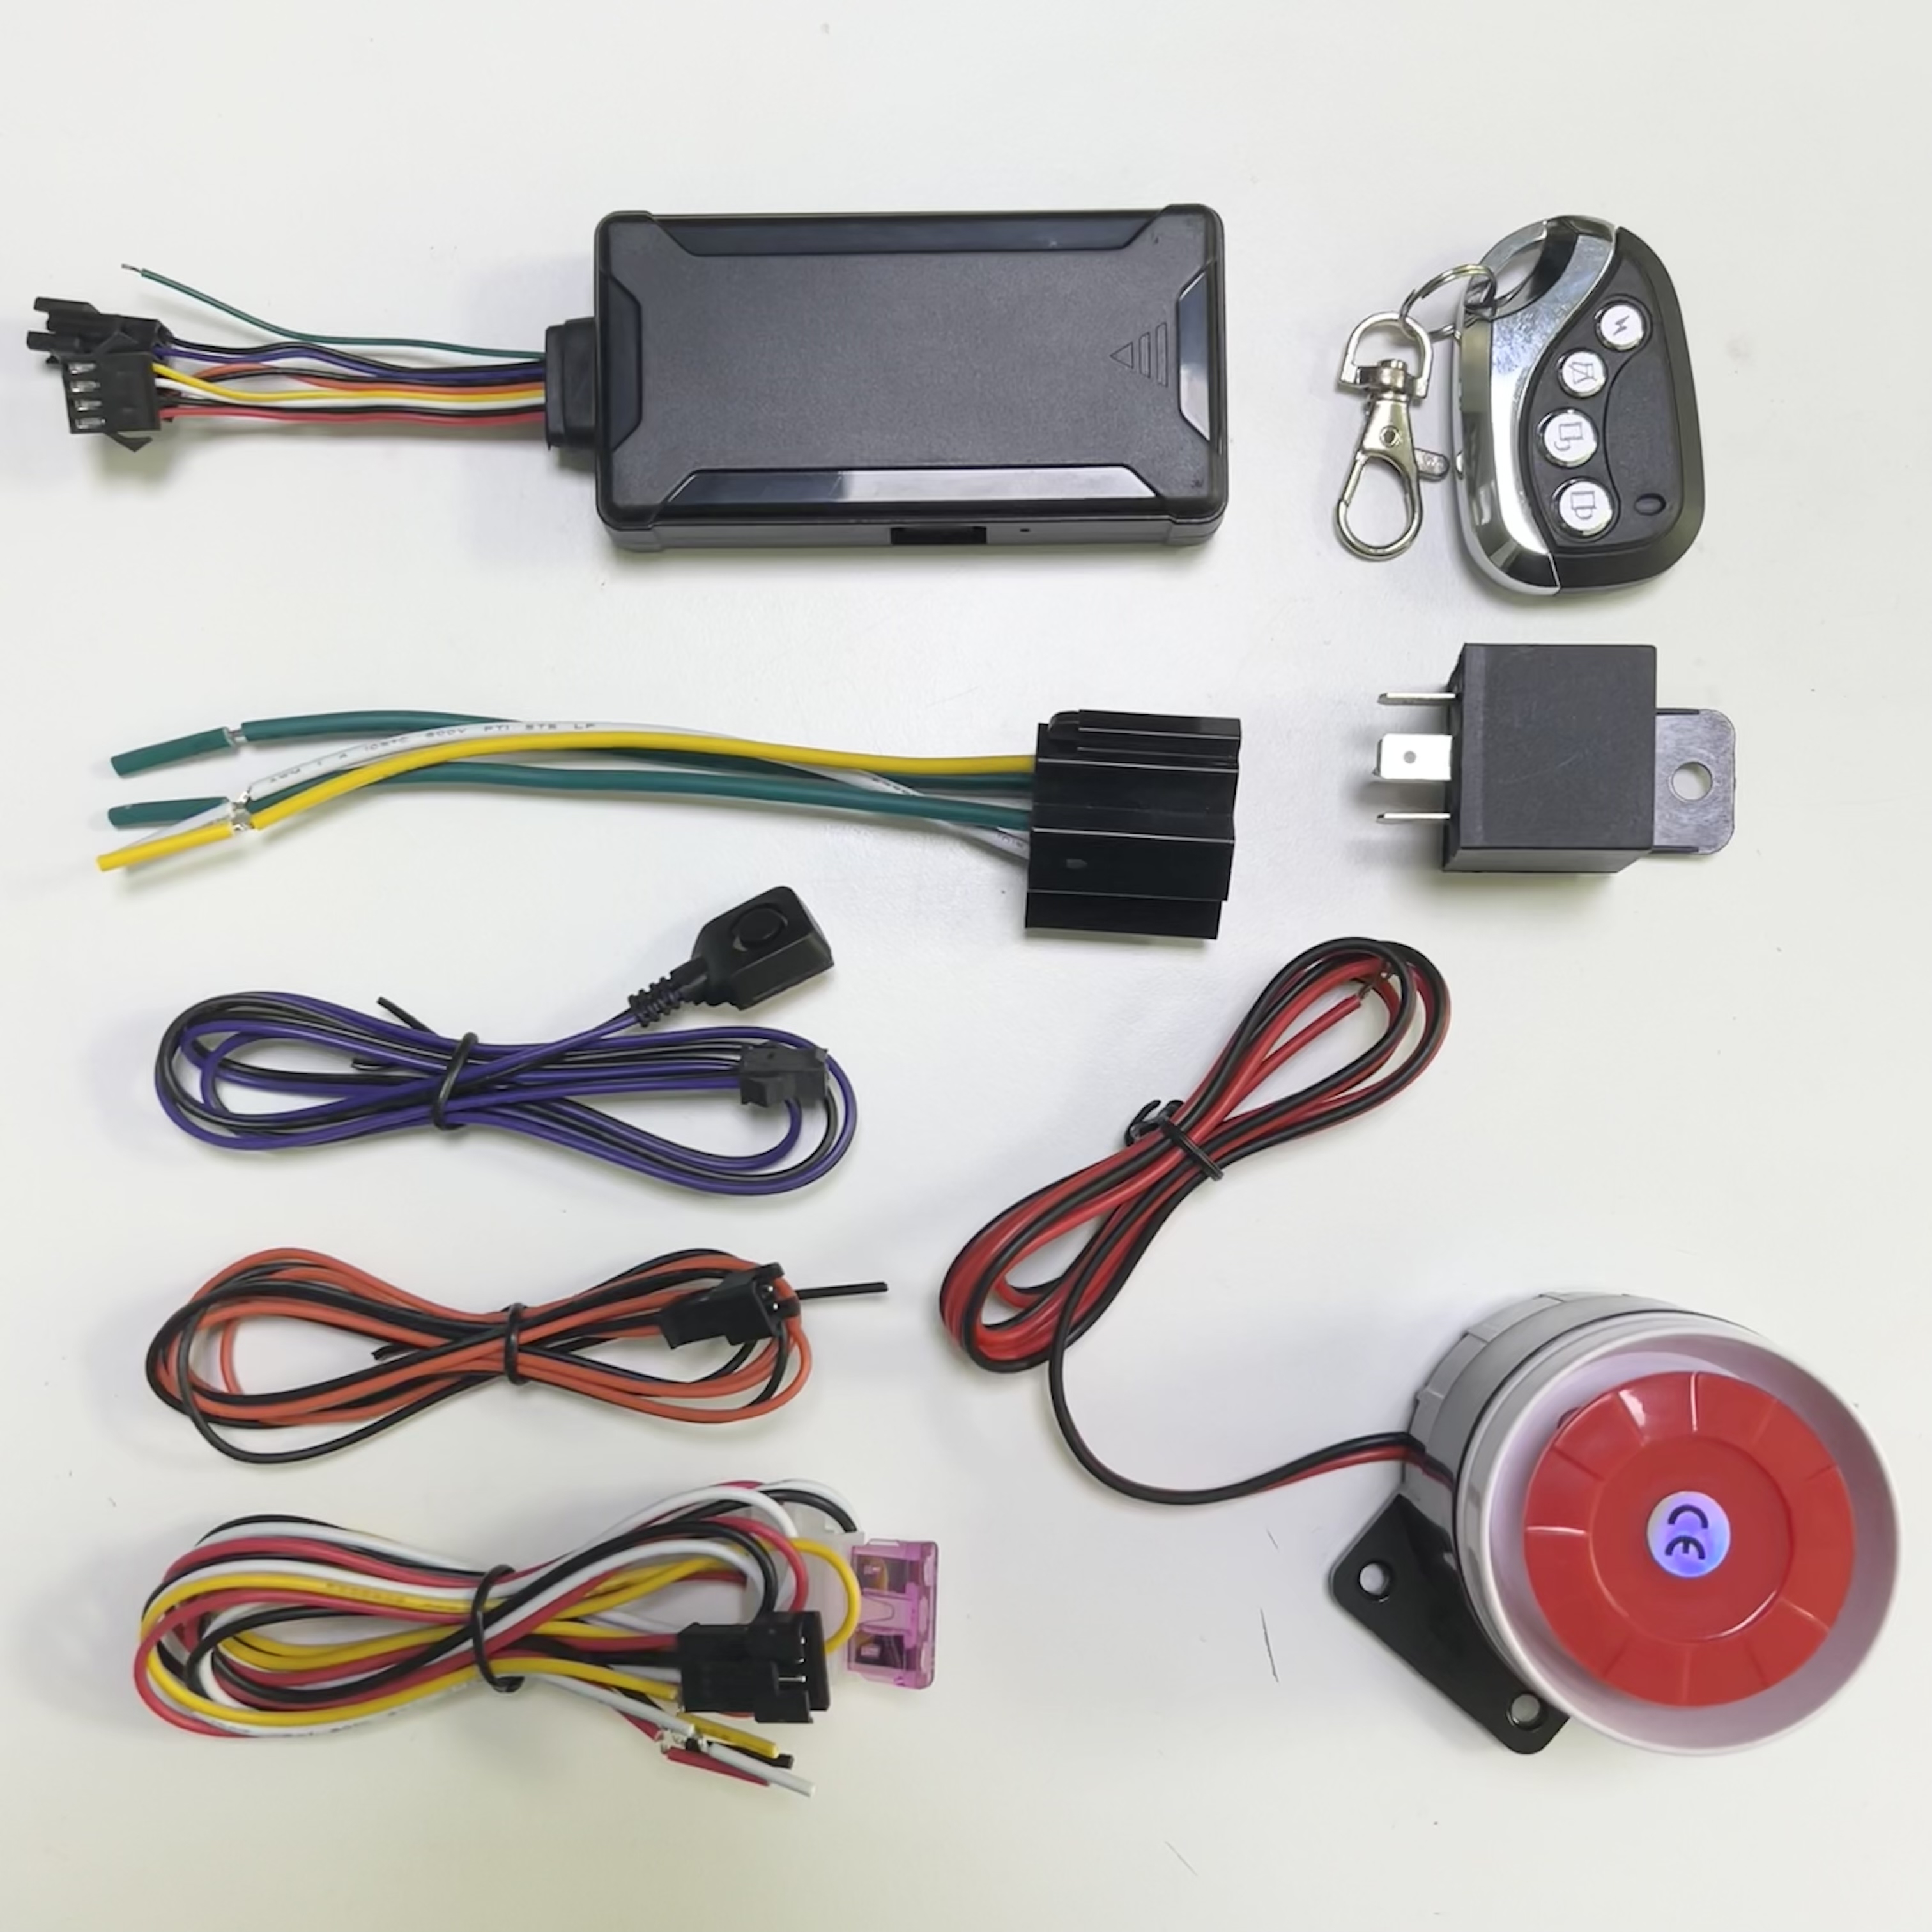 4G GPS Tracker manufacture